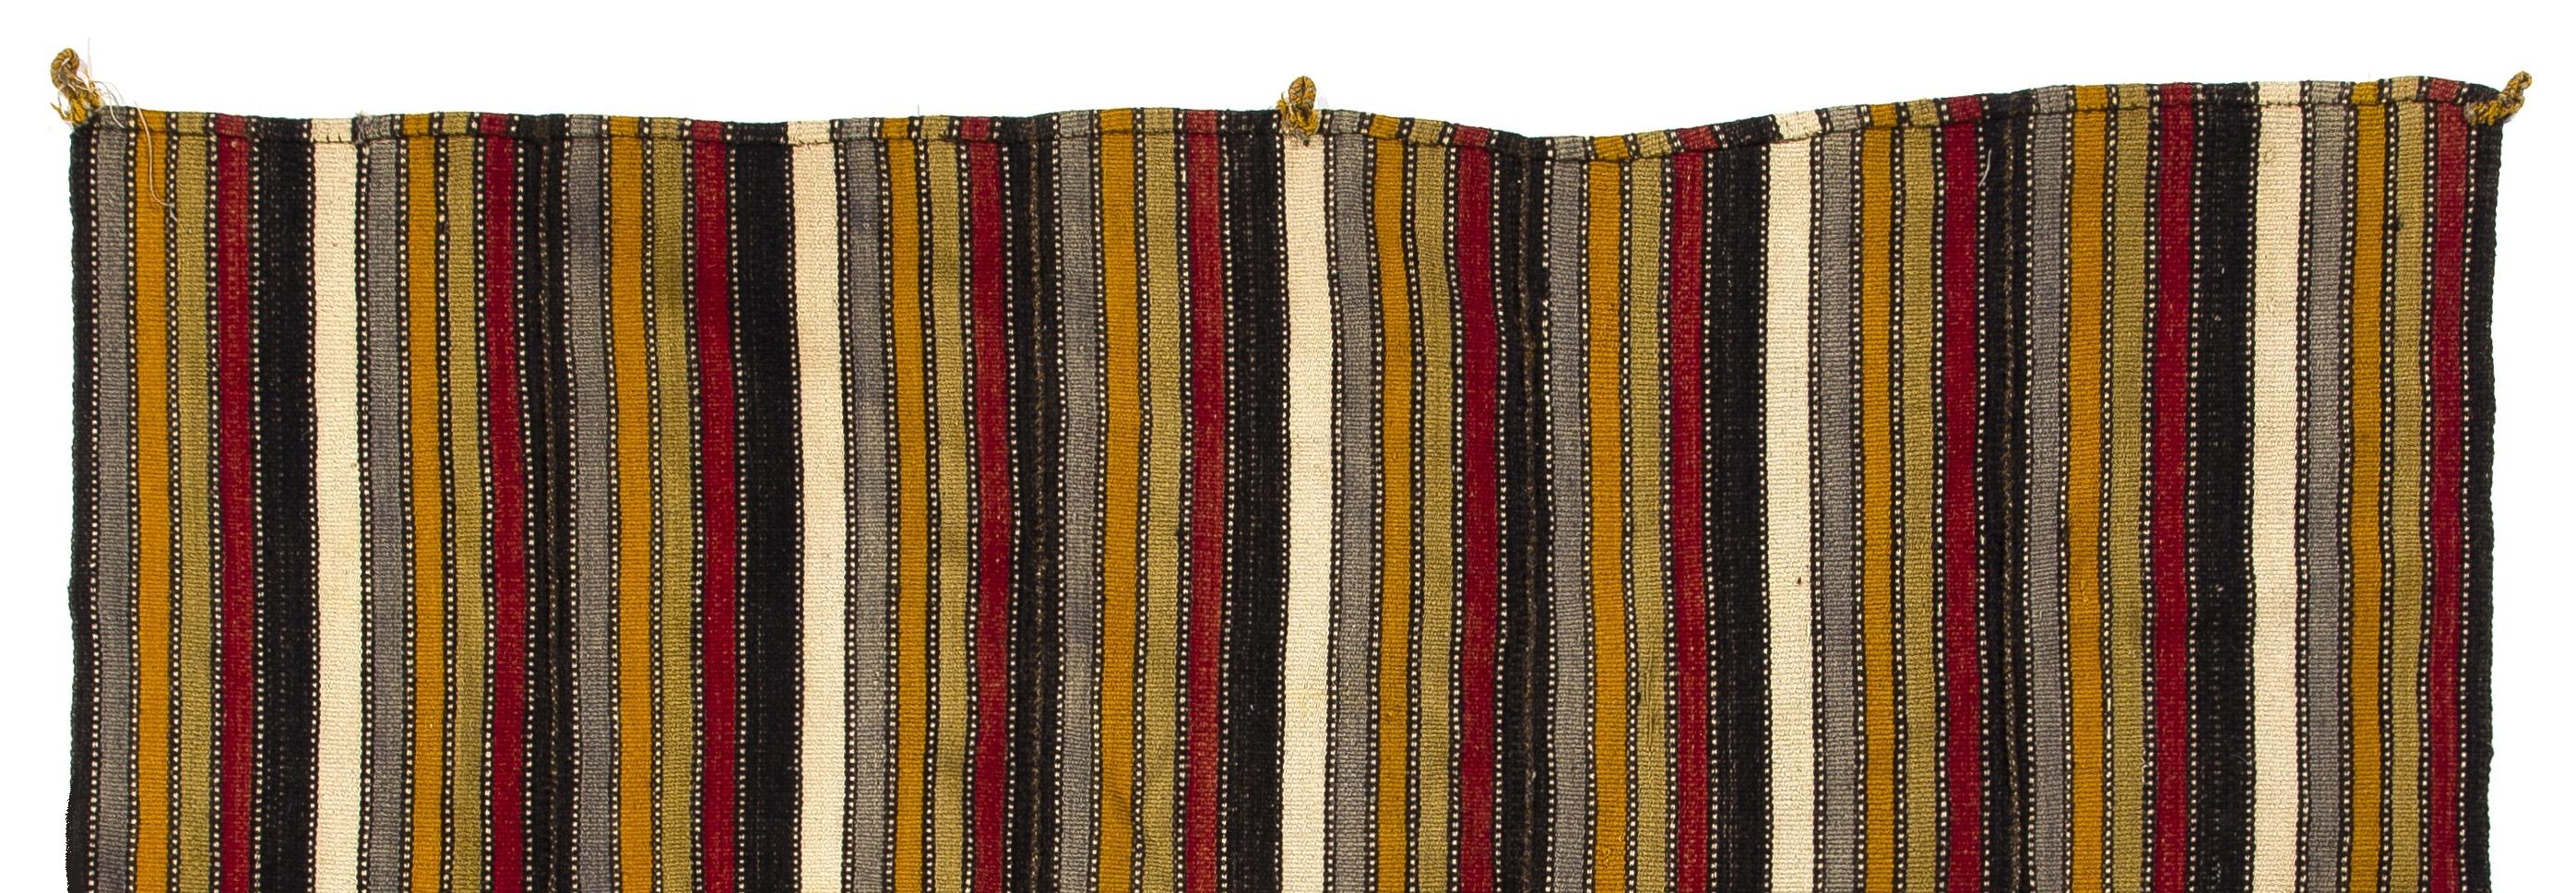 These authentic flat-weaves (Kilims) from Central Turkey were handwoven by Nomads to be used as a floor covering in their tents or summer houses until late 20th century. It is made of multi colored wool; the white stripes are of cotton. Measures: